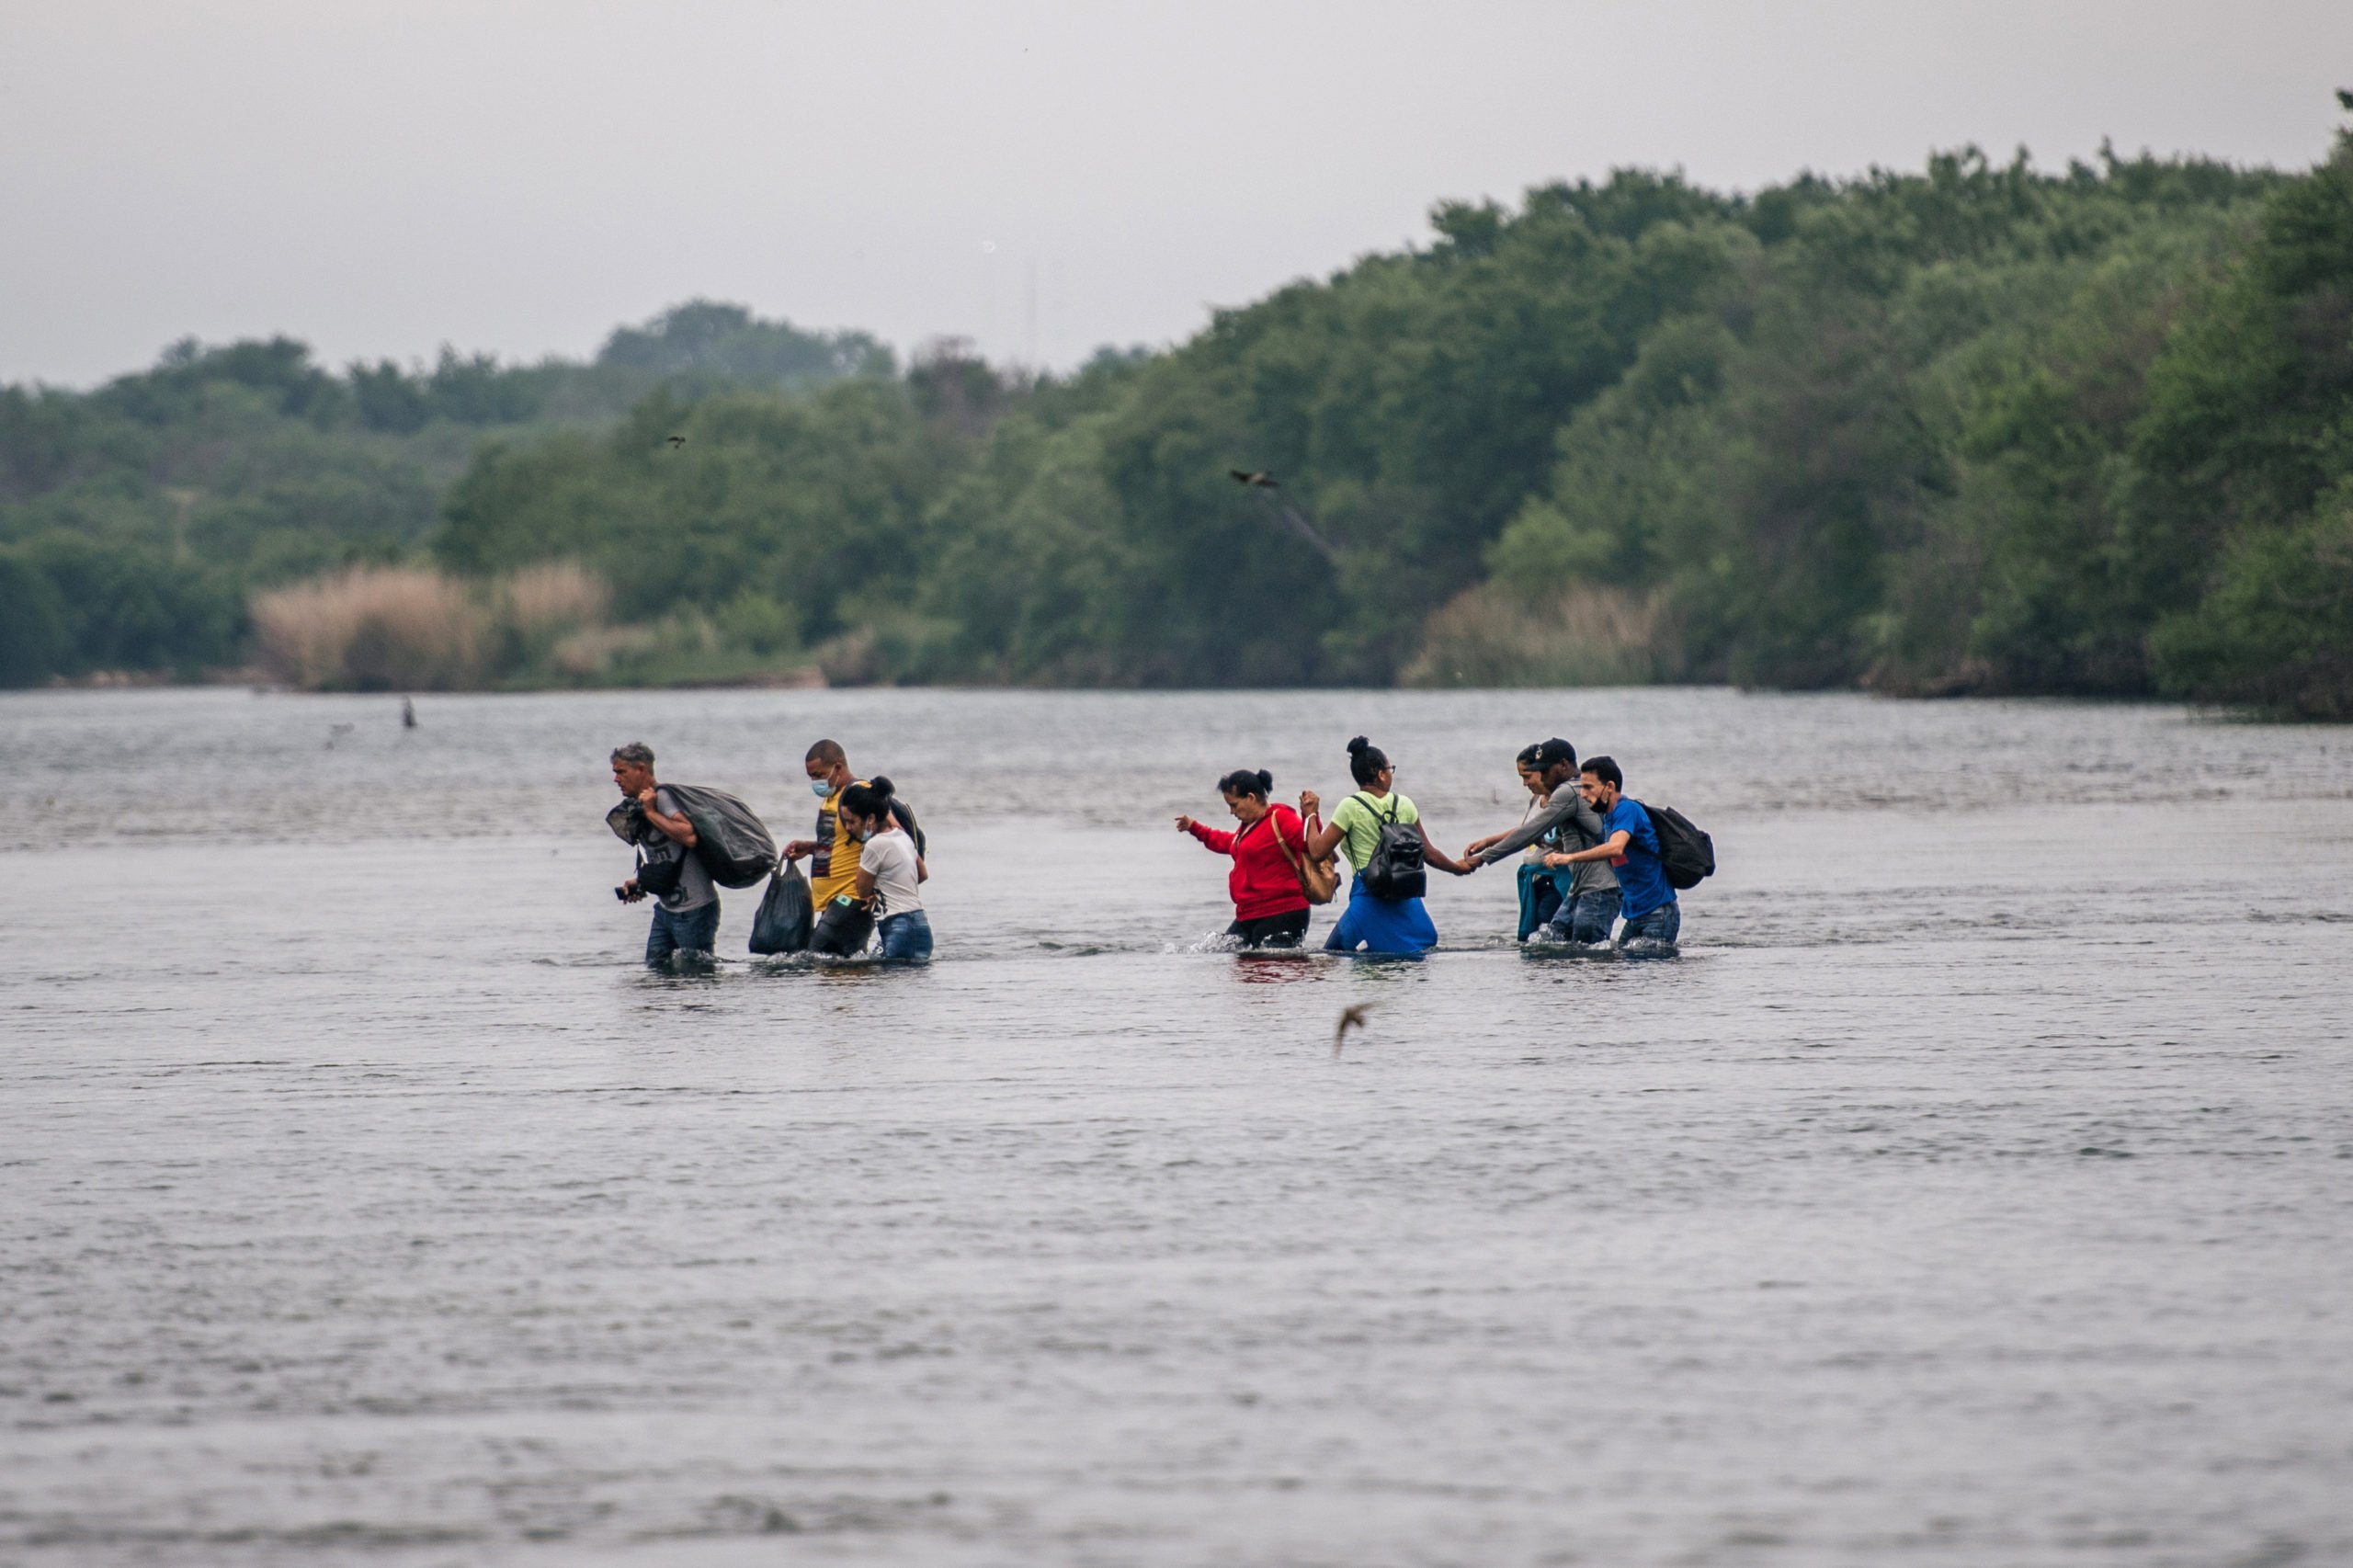 DEL RIO, TEXAS - MAY 17: Immigrants cross the Rio Grande river into the U.S. on May 17, 2021 in Del Rio, Texas. A surge of mostly Central American immigrants crossing into the United States has challenged U.S. immigration agencies along the U.S. Southern border. (Photo by Brandon Bell/Getty Images)